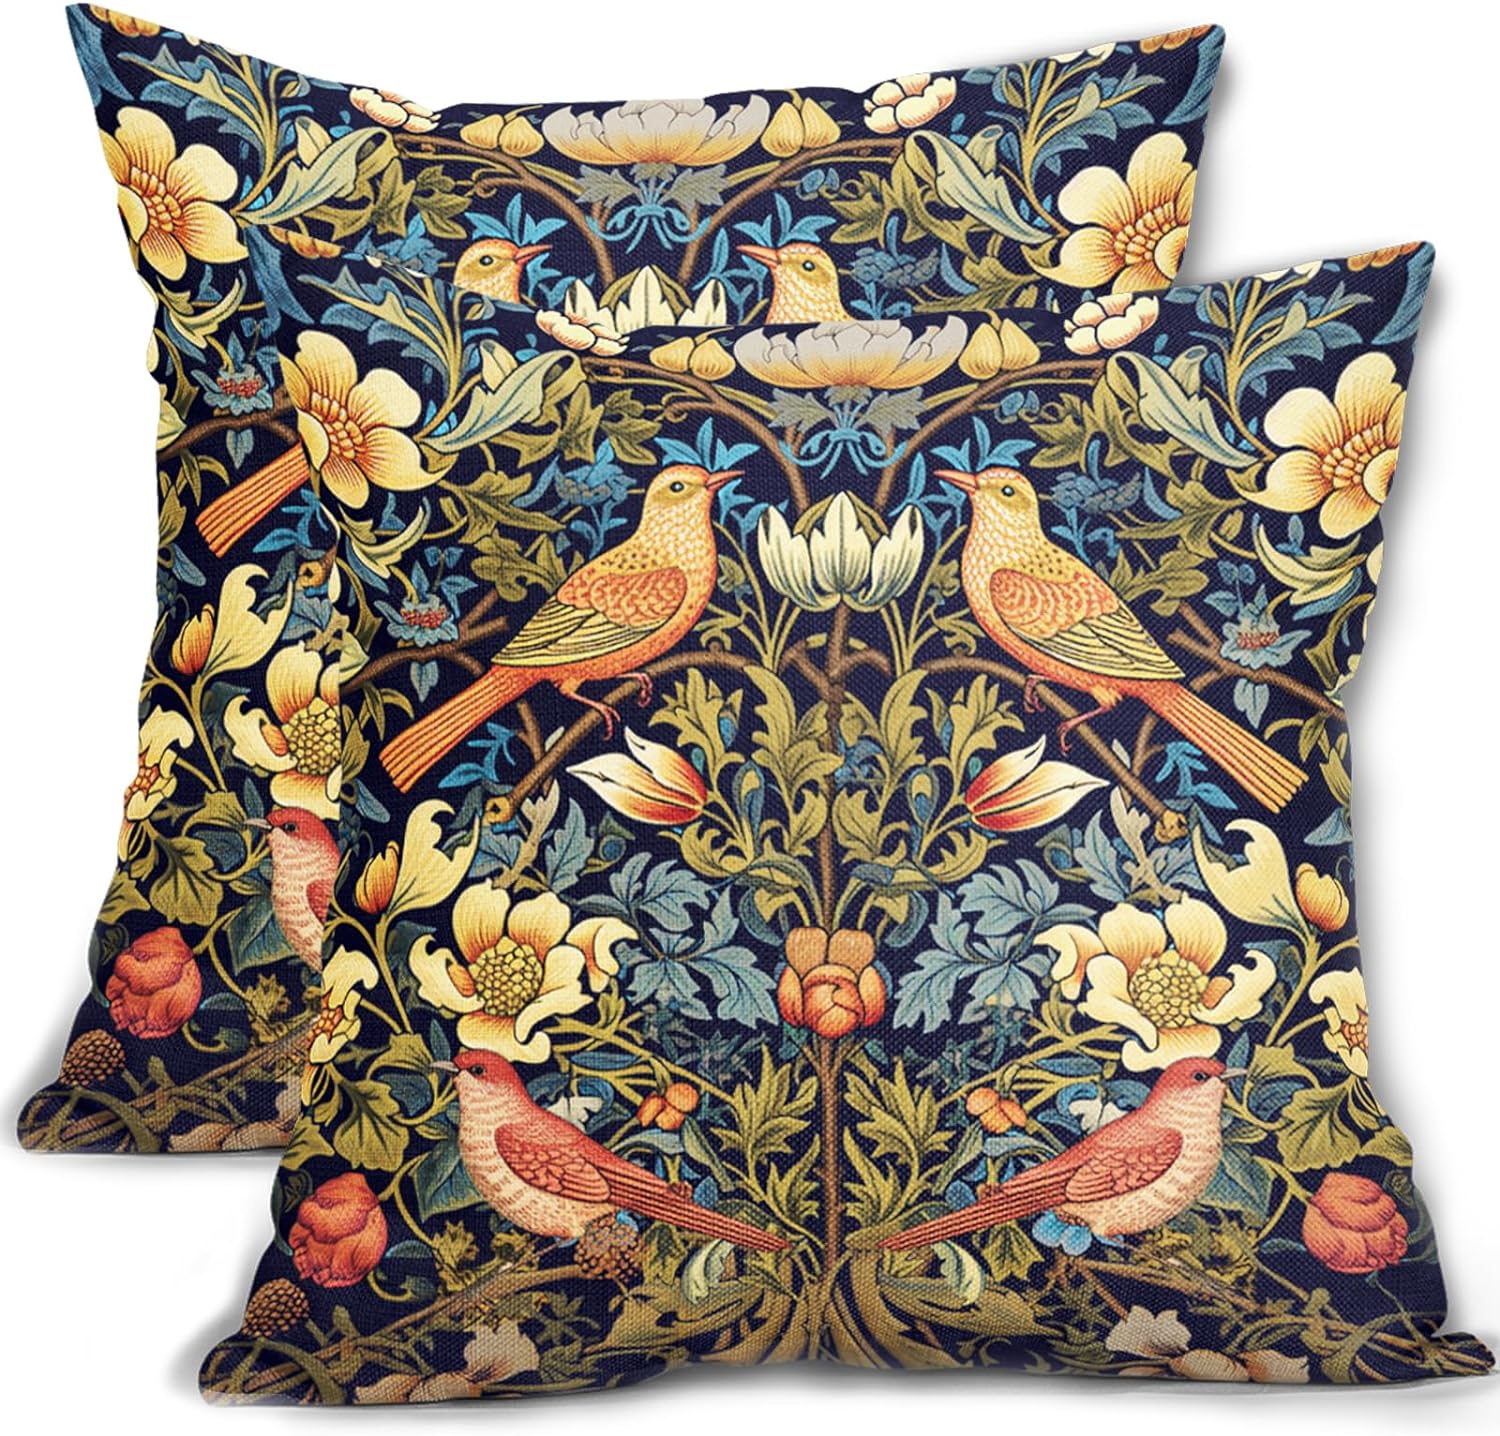 ABSOP Green Chinoiserie Pillow Cover 20x20 Inch Set of 2 Blue and Yellow Floral Throw Covers Flower Bird Cotton Linen Square Pillowscase Cushion for Sofa Couch Bedroom Home Decor